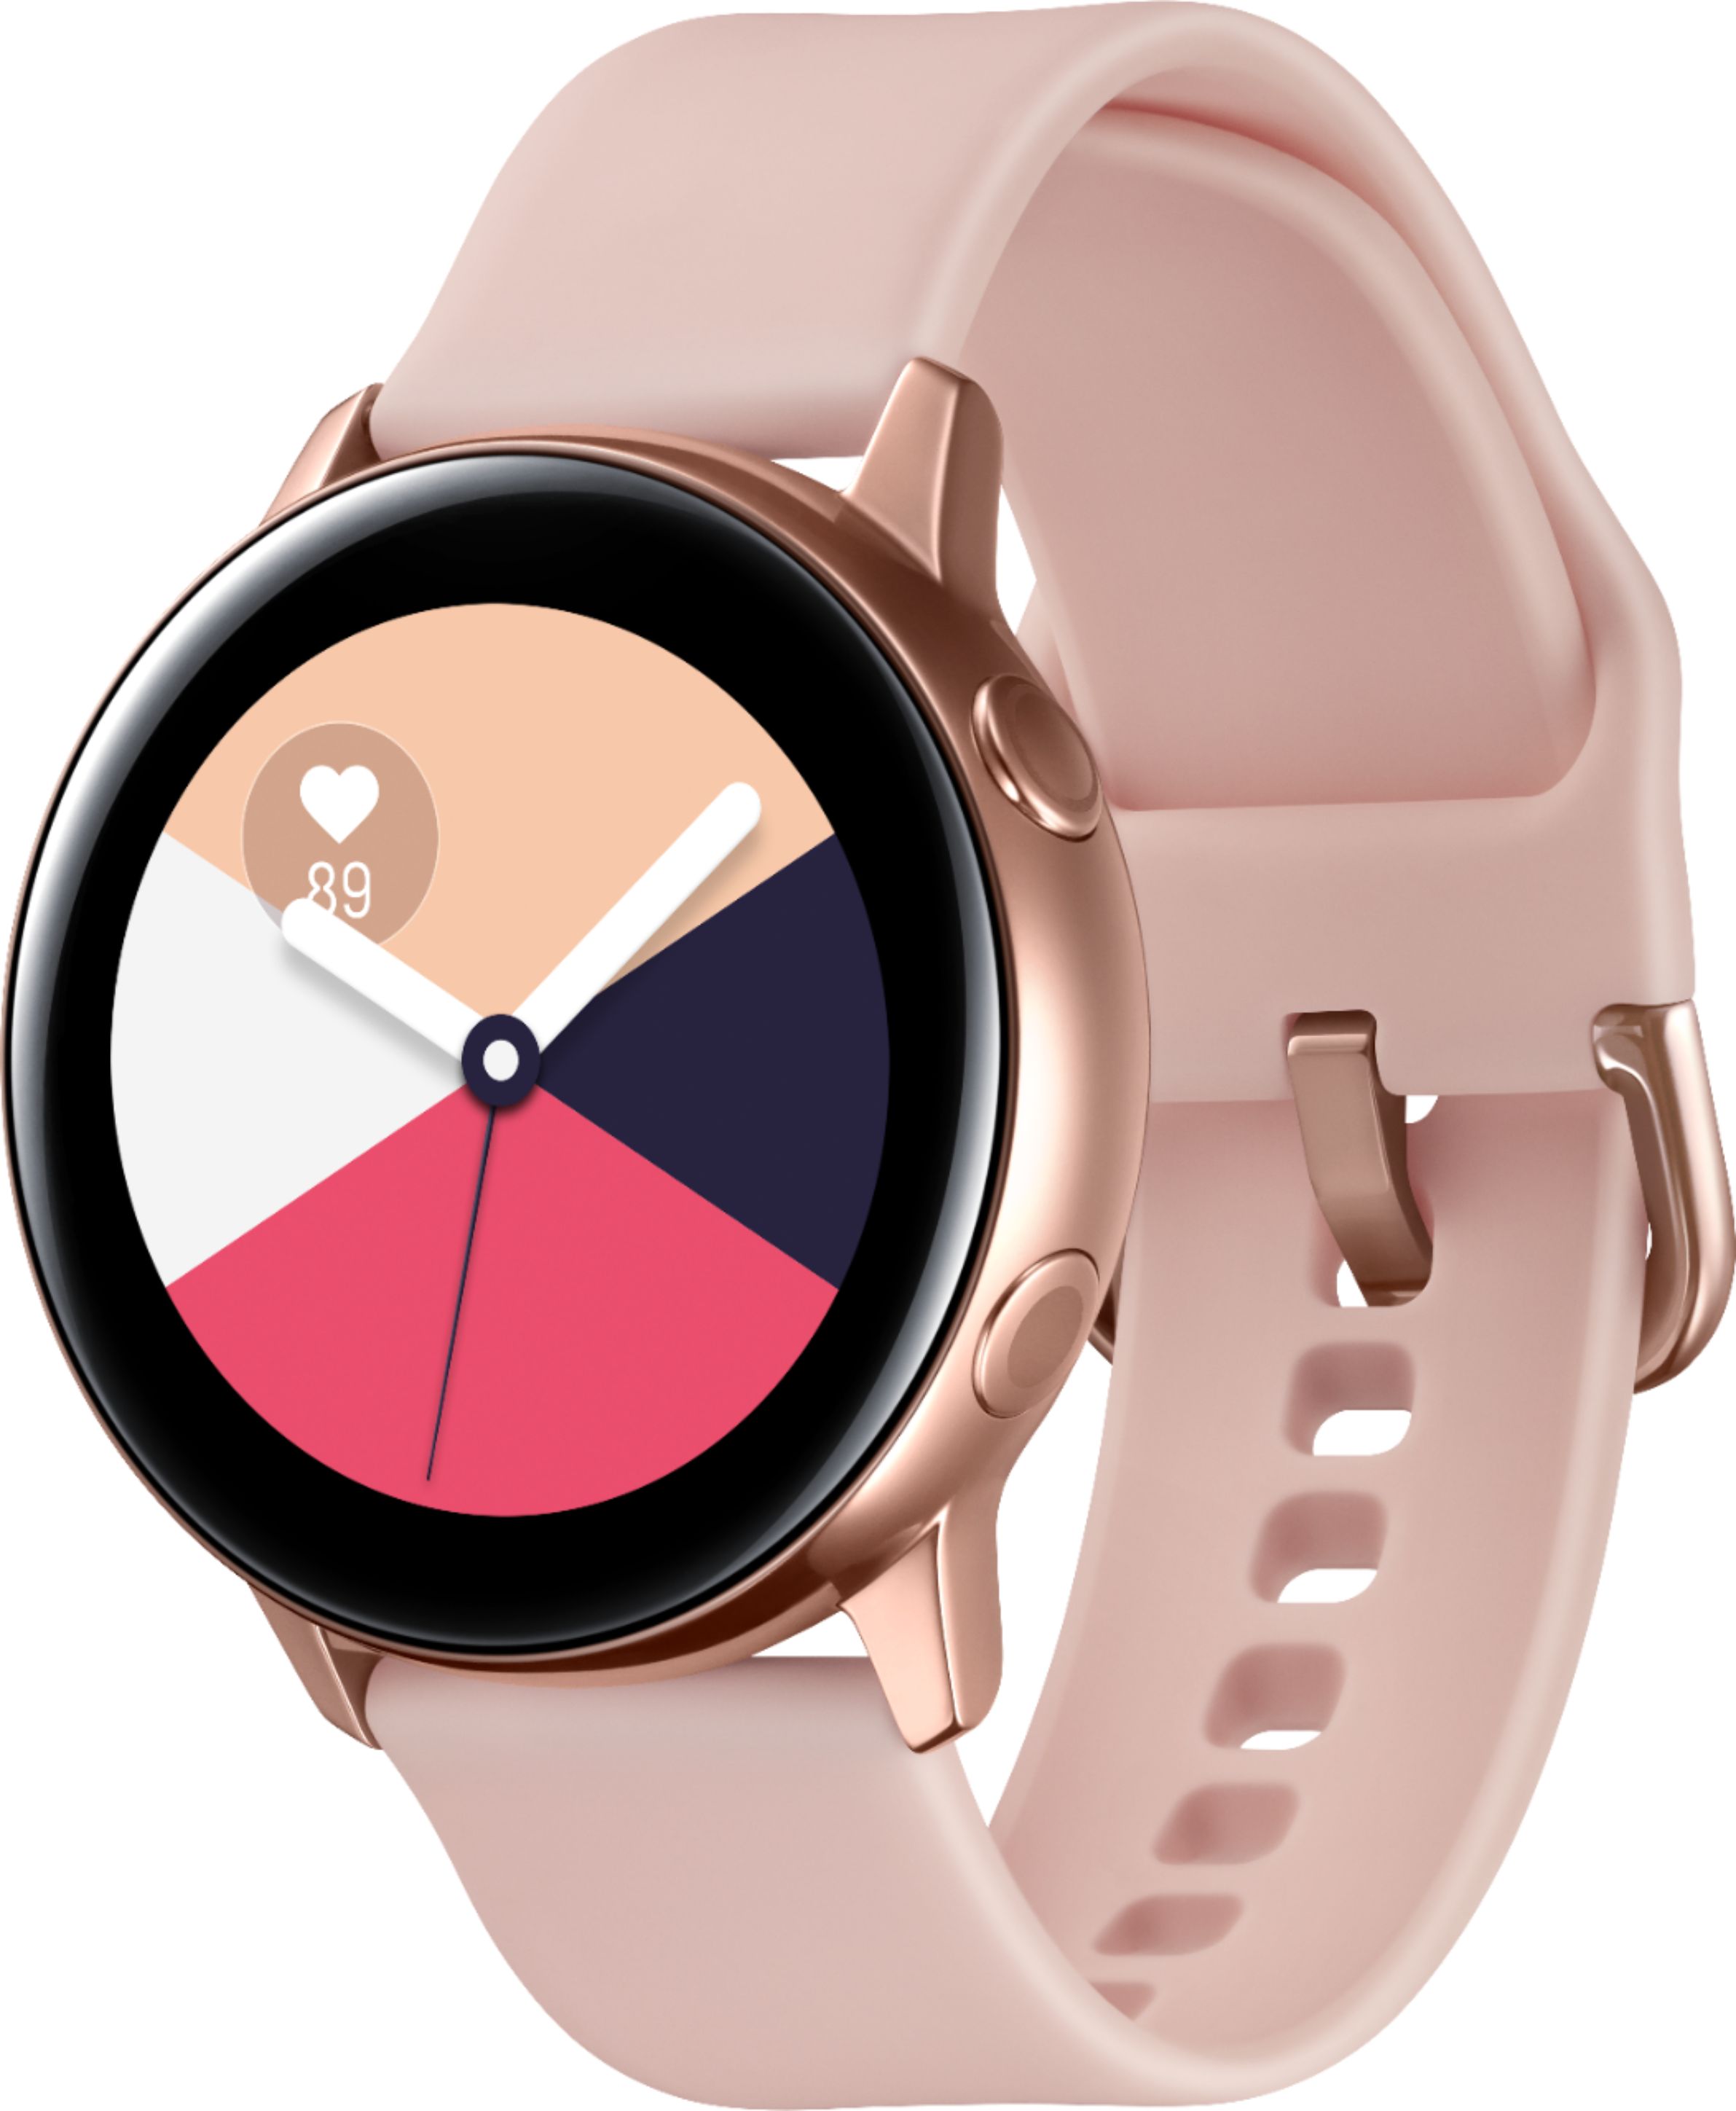 galaxy watch rose gold with black band